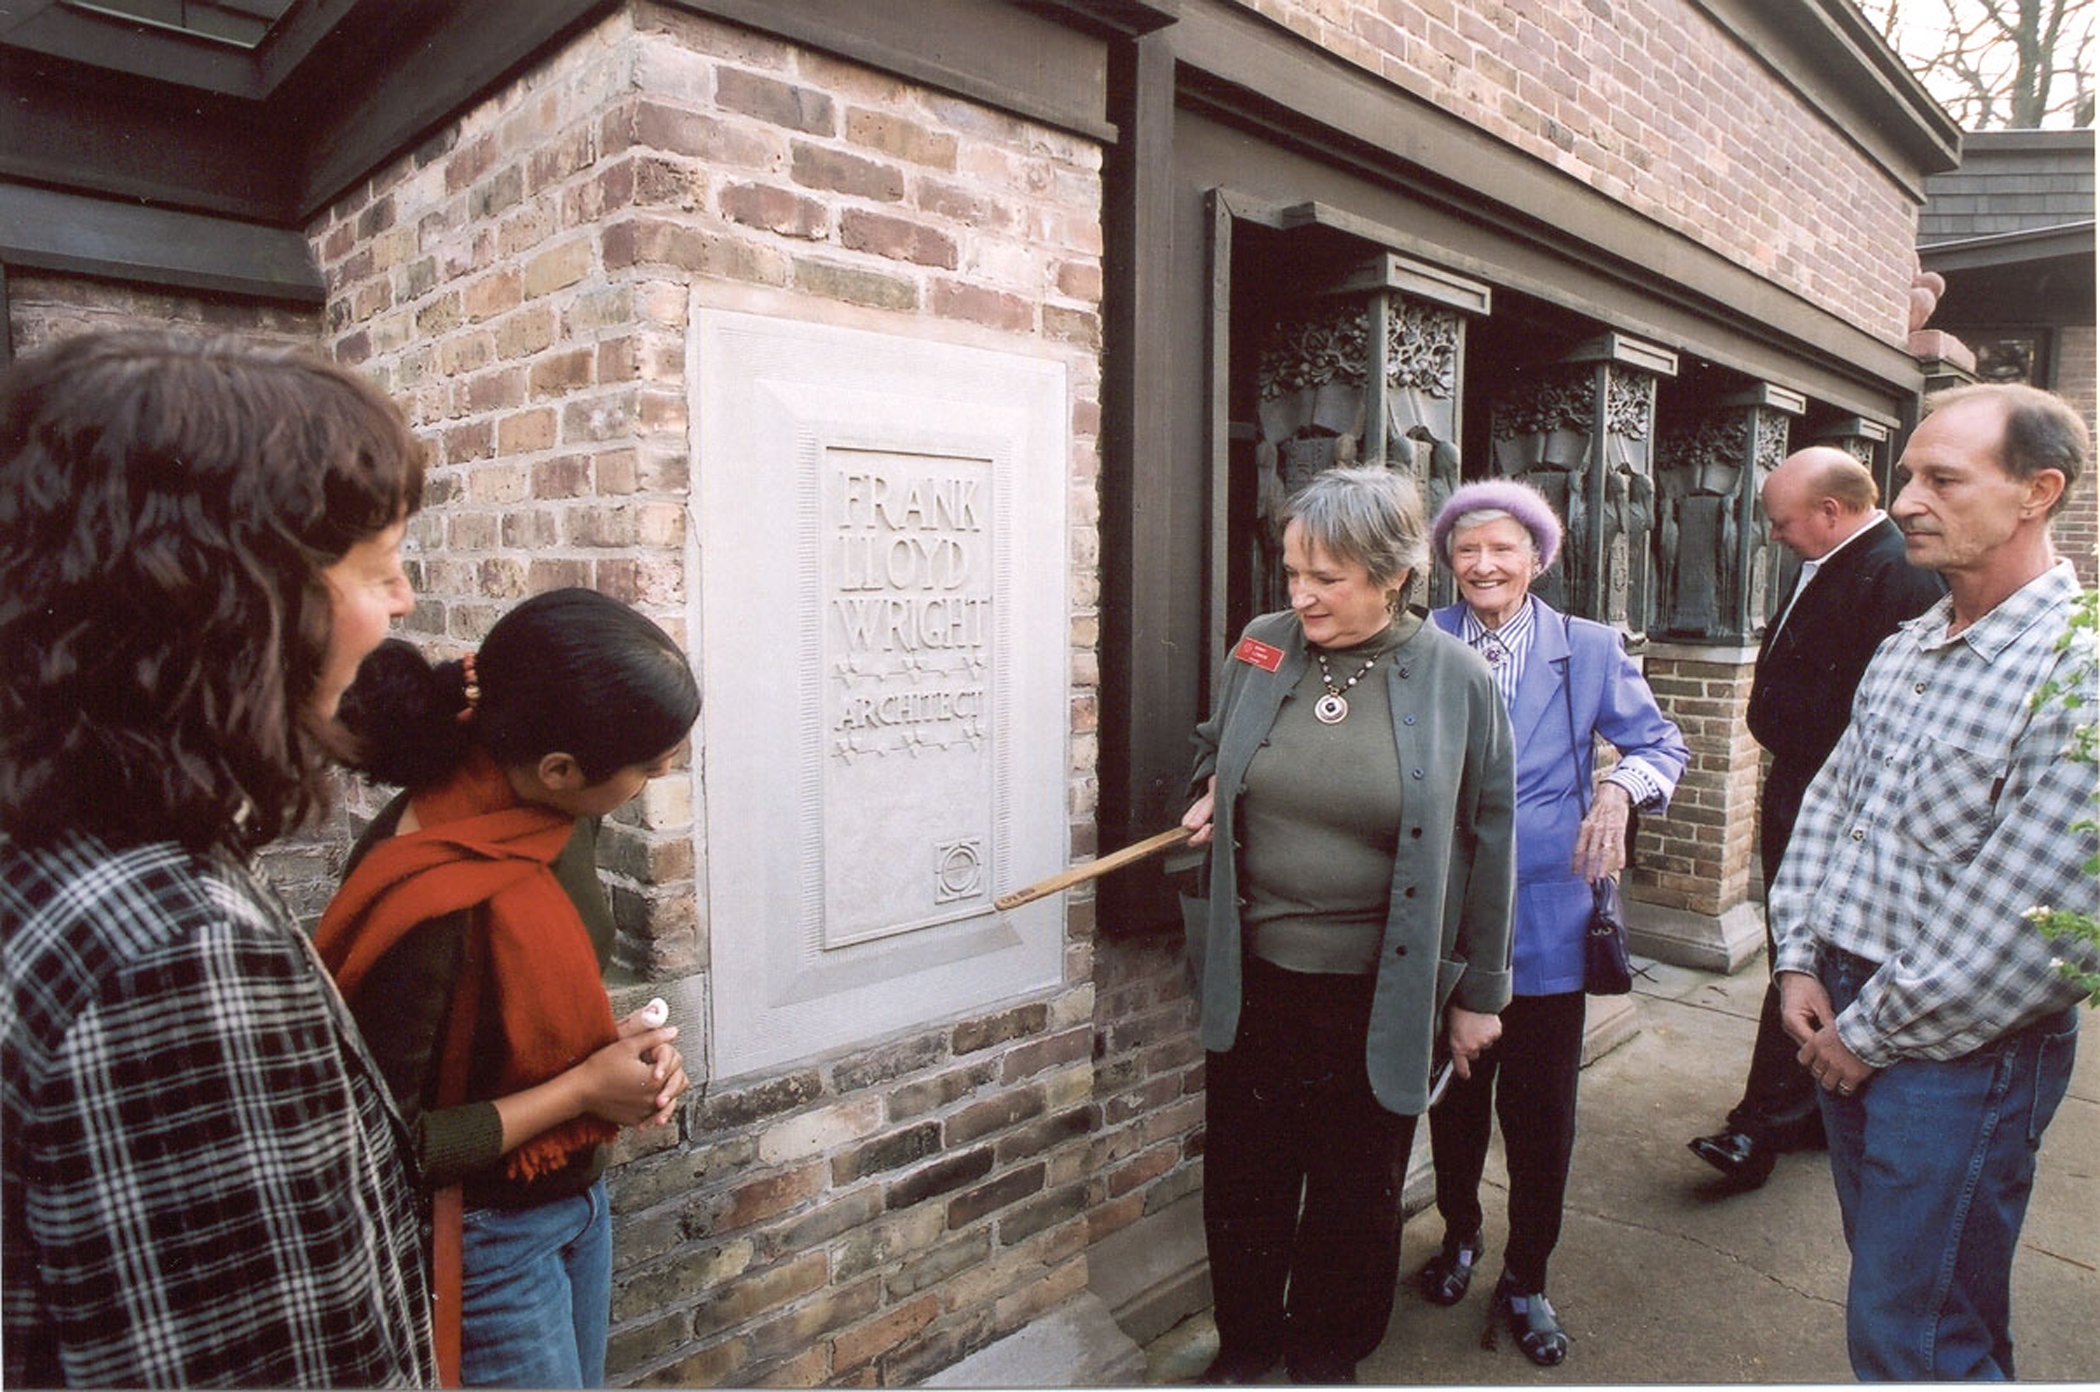 A guide talks with visitors at the entrance to the 1898 studio annex connected to the Frank Lloyd Wright home in Oak Park, Illinois